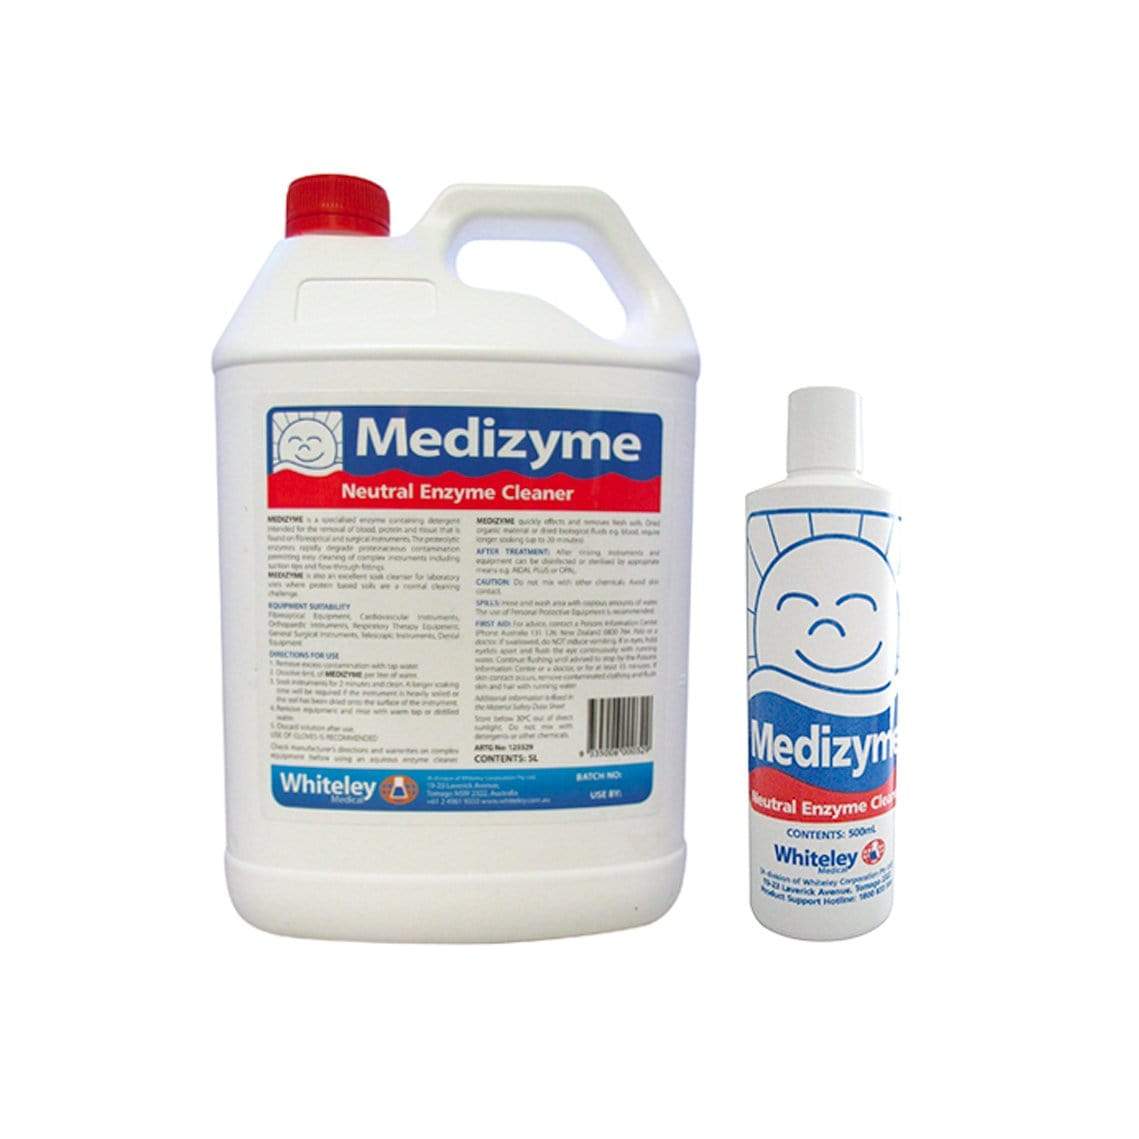 Medizyme Neutral Enzyme Cleaner